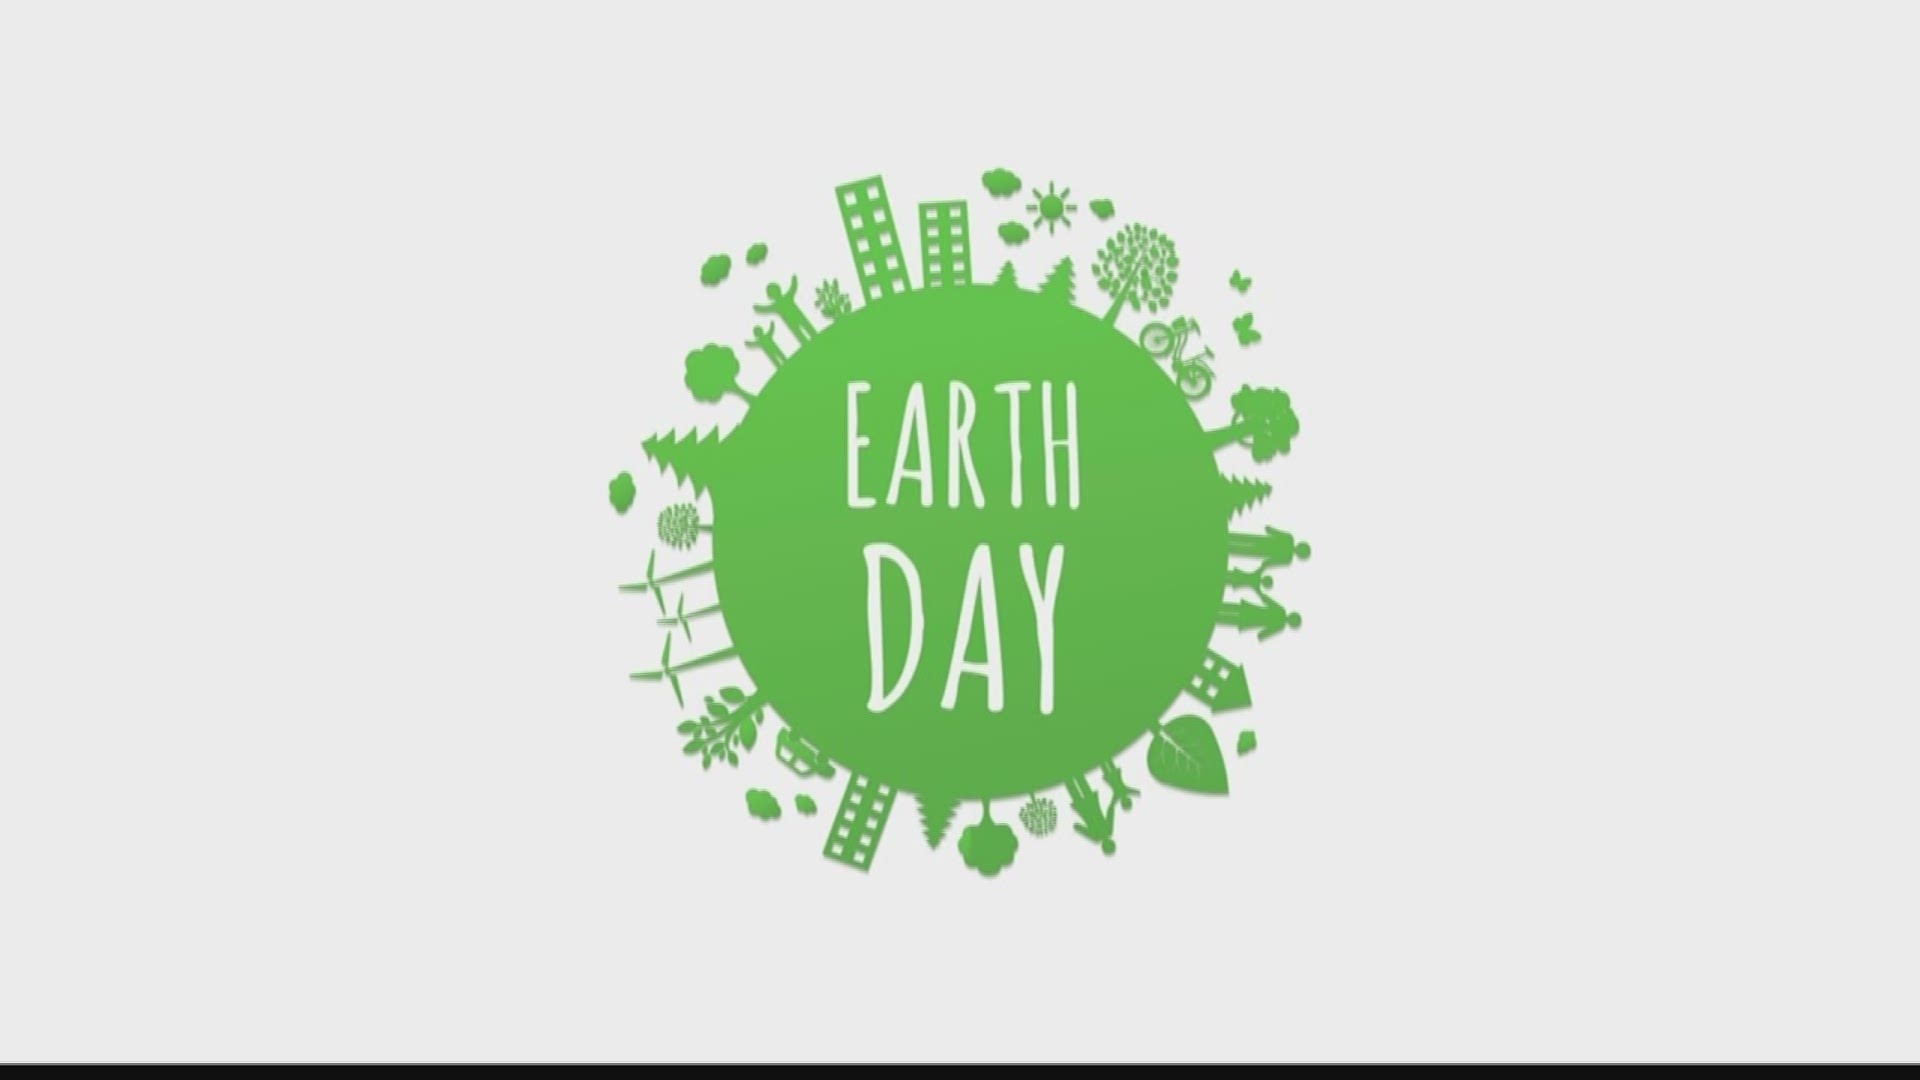 The first Earth Day was held in 1970.